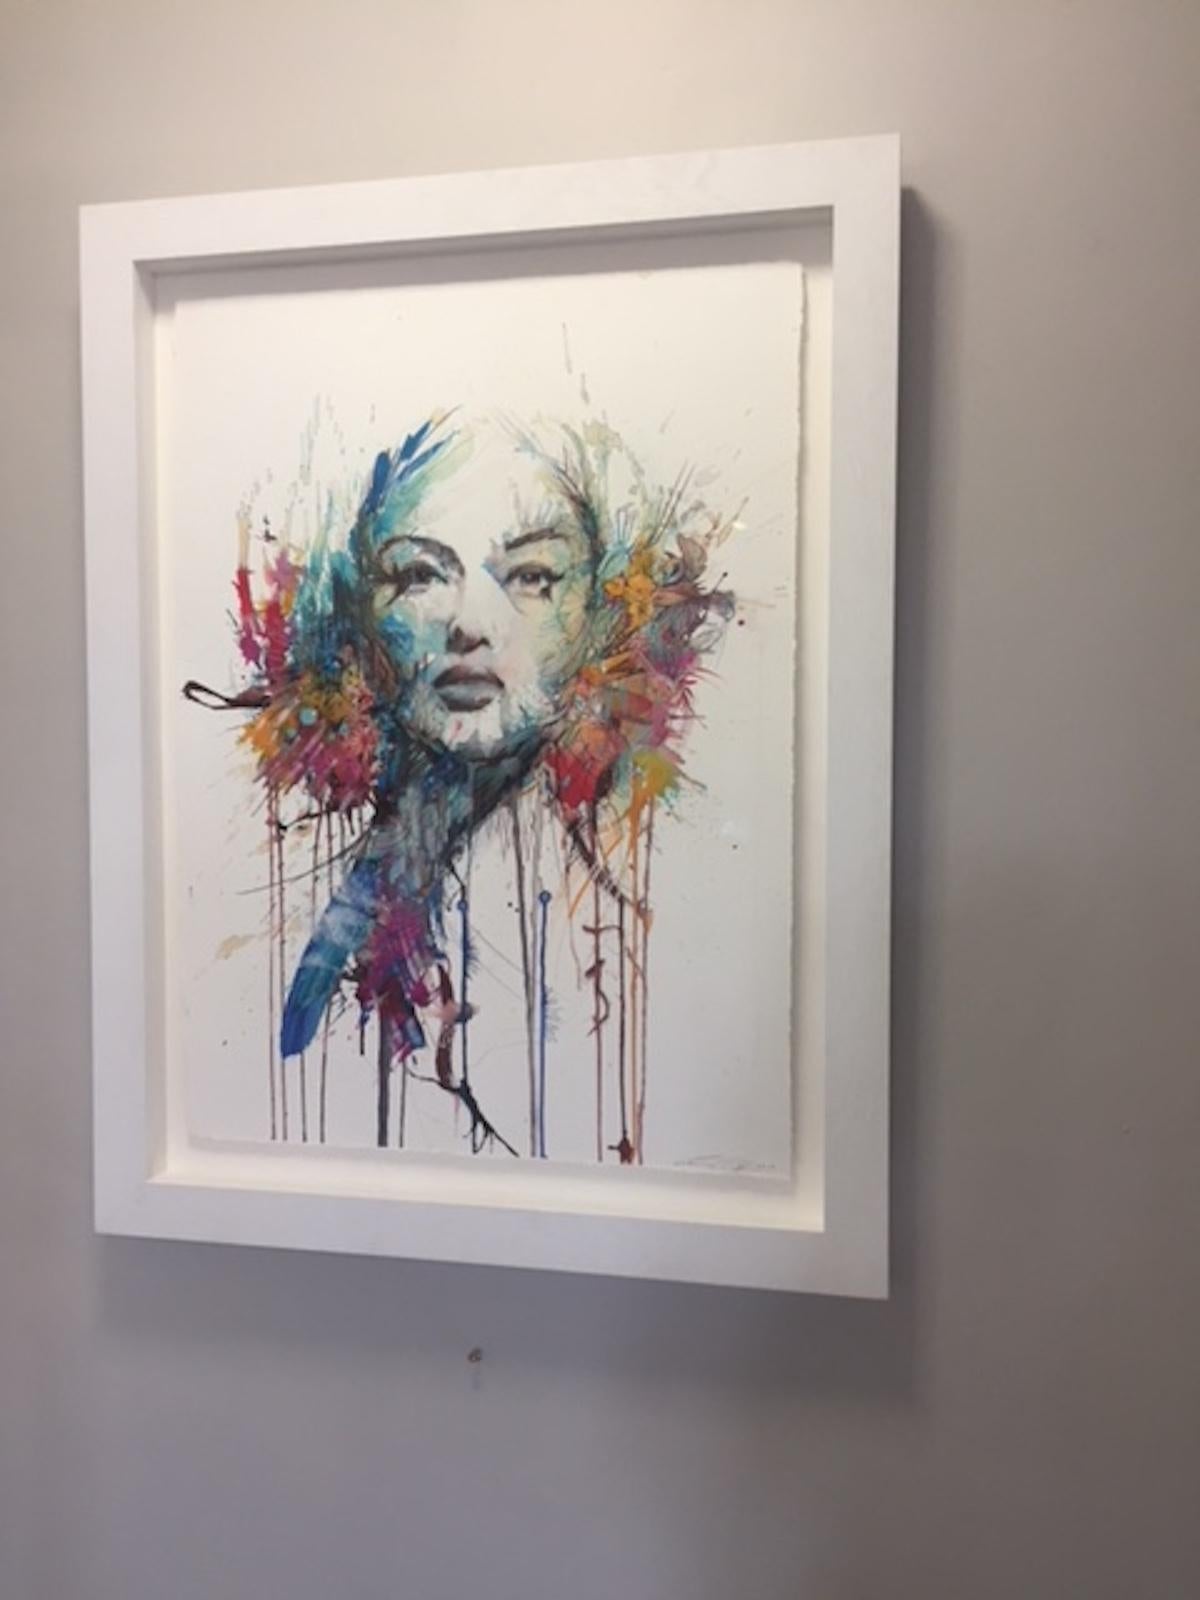 The Butterfly Effect by Carne Griffiths
Original and hand signed by the artist 
Mixed Media on Watercolour Paper 
Image size: H:82cm x w:63.5cm
Complete size of framed work: H:82cm x W:63.5cm
Sold framed
Please note that insitu images are purely an